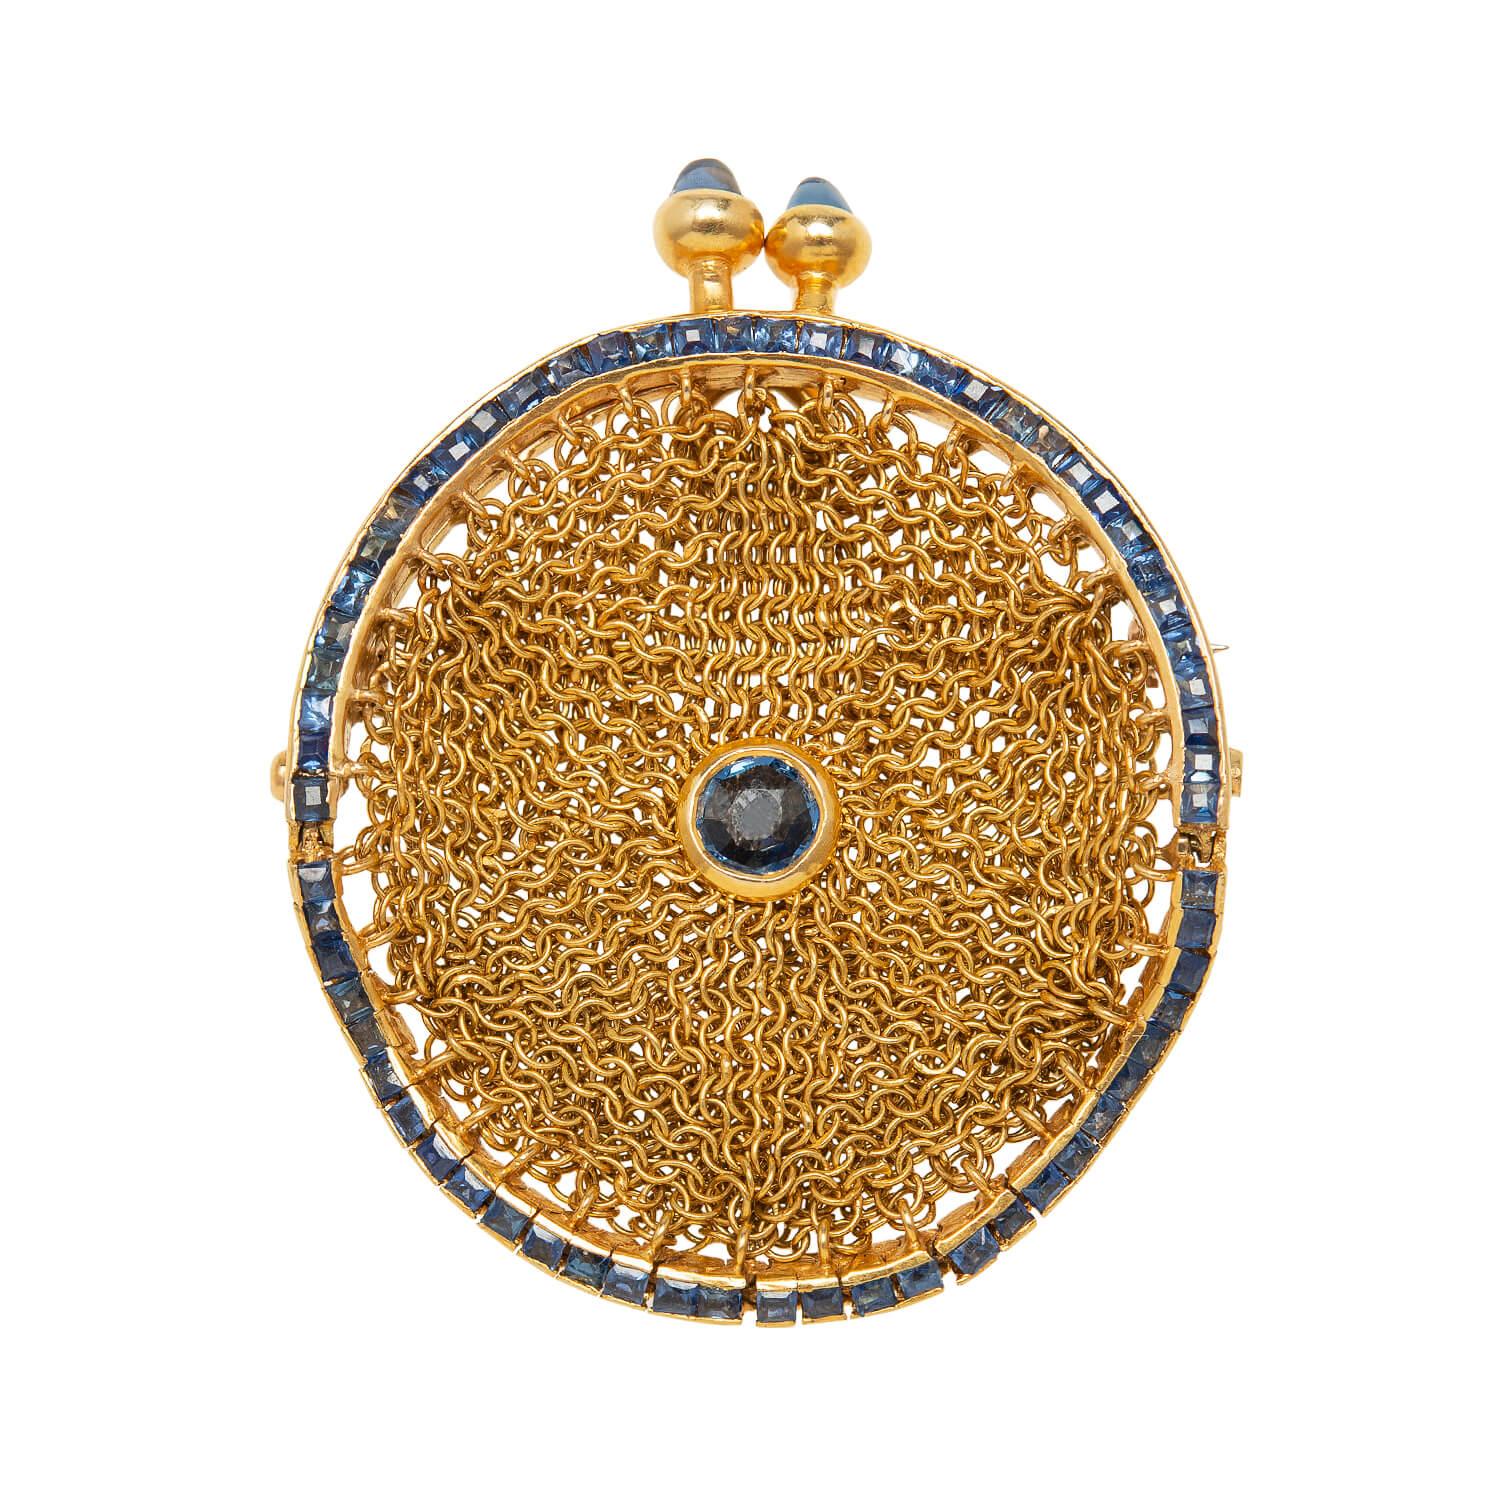 An absolutely gorgeous and unique chatelaine purse from the Victorian (ca1880) era! Crafted in 18k yellow gold, this ornate coin purse features a beautiful frame that holds a hand wrought mesh bag. The frame displays an incredible line of calibrated